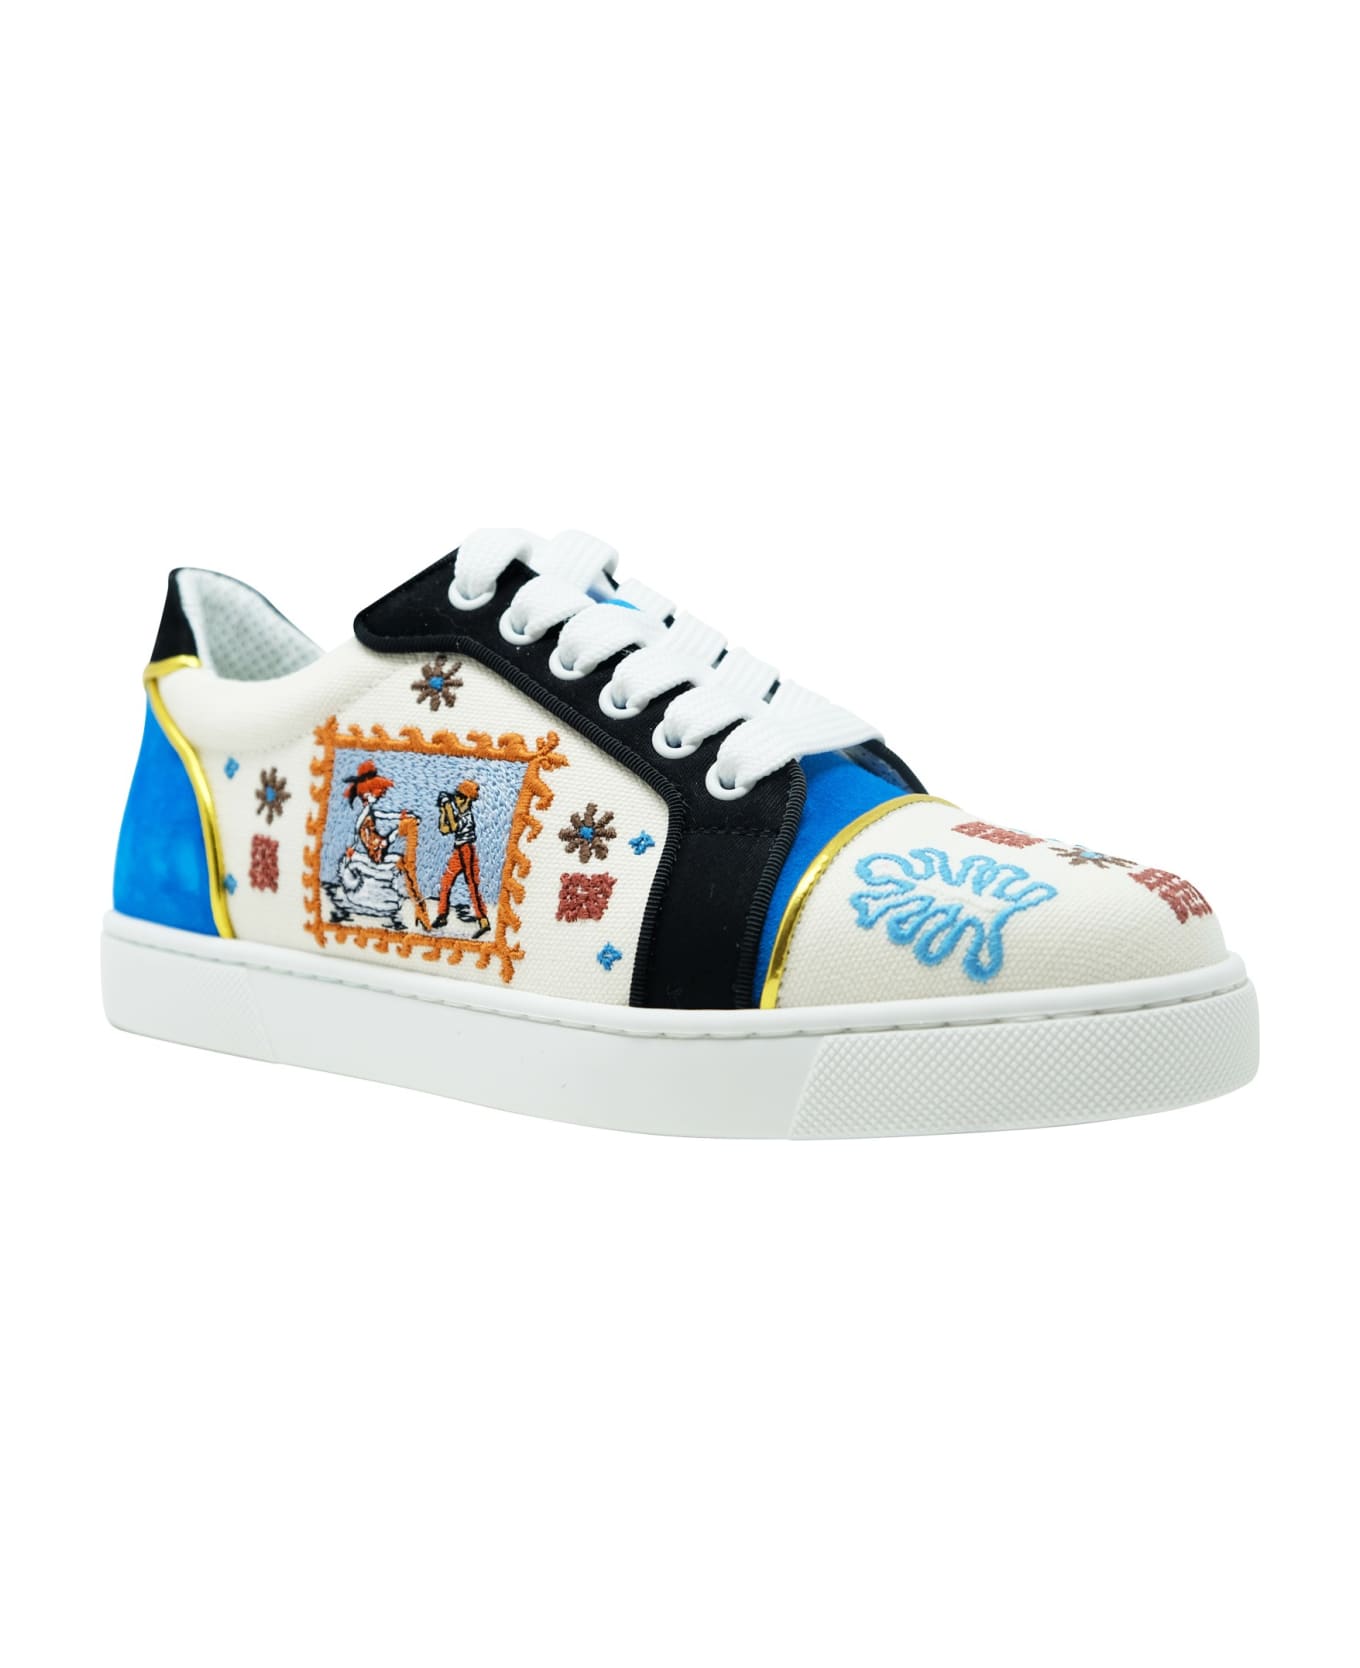 Christian Louboutin 3220060 Cma3 Multi Leather Olona Brodee Vieira Sneakers - MULTICOLOR スニーカー